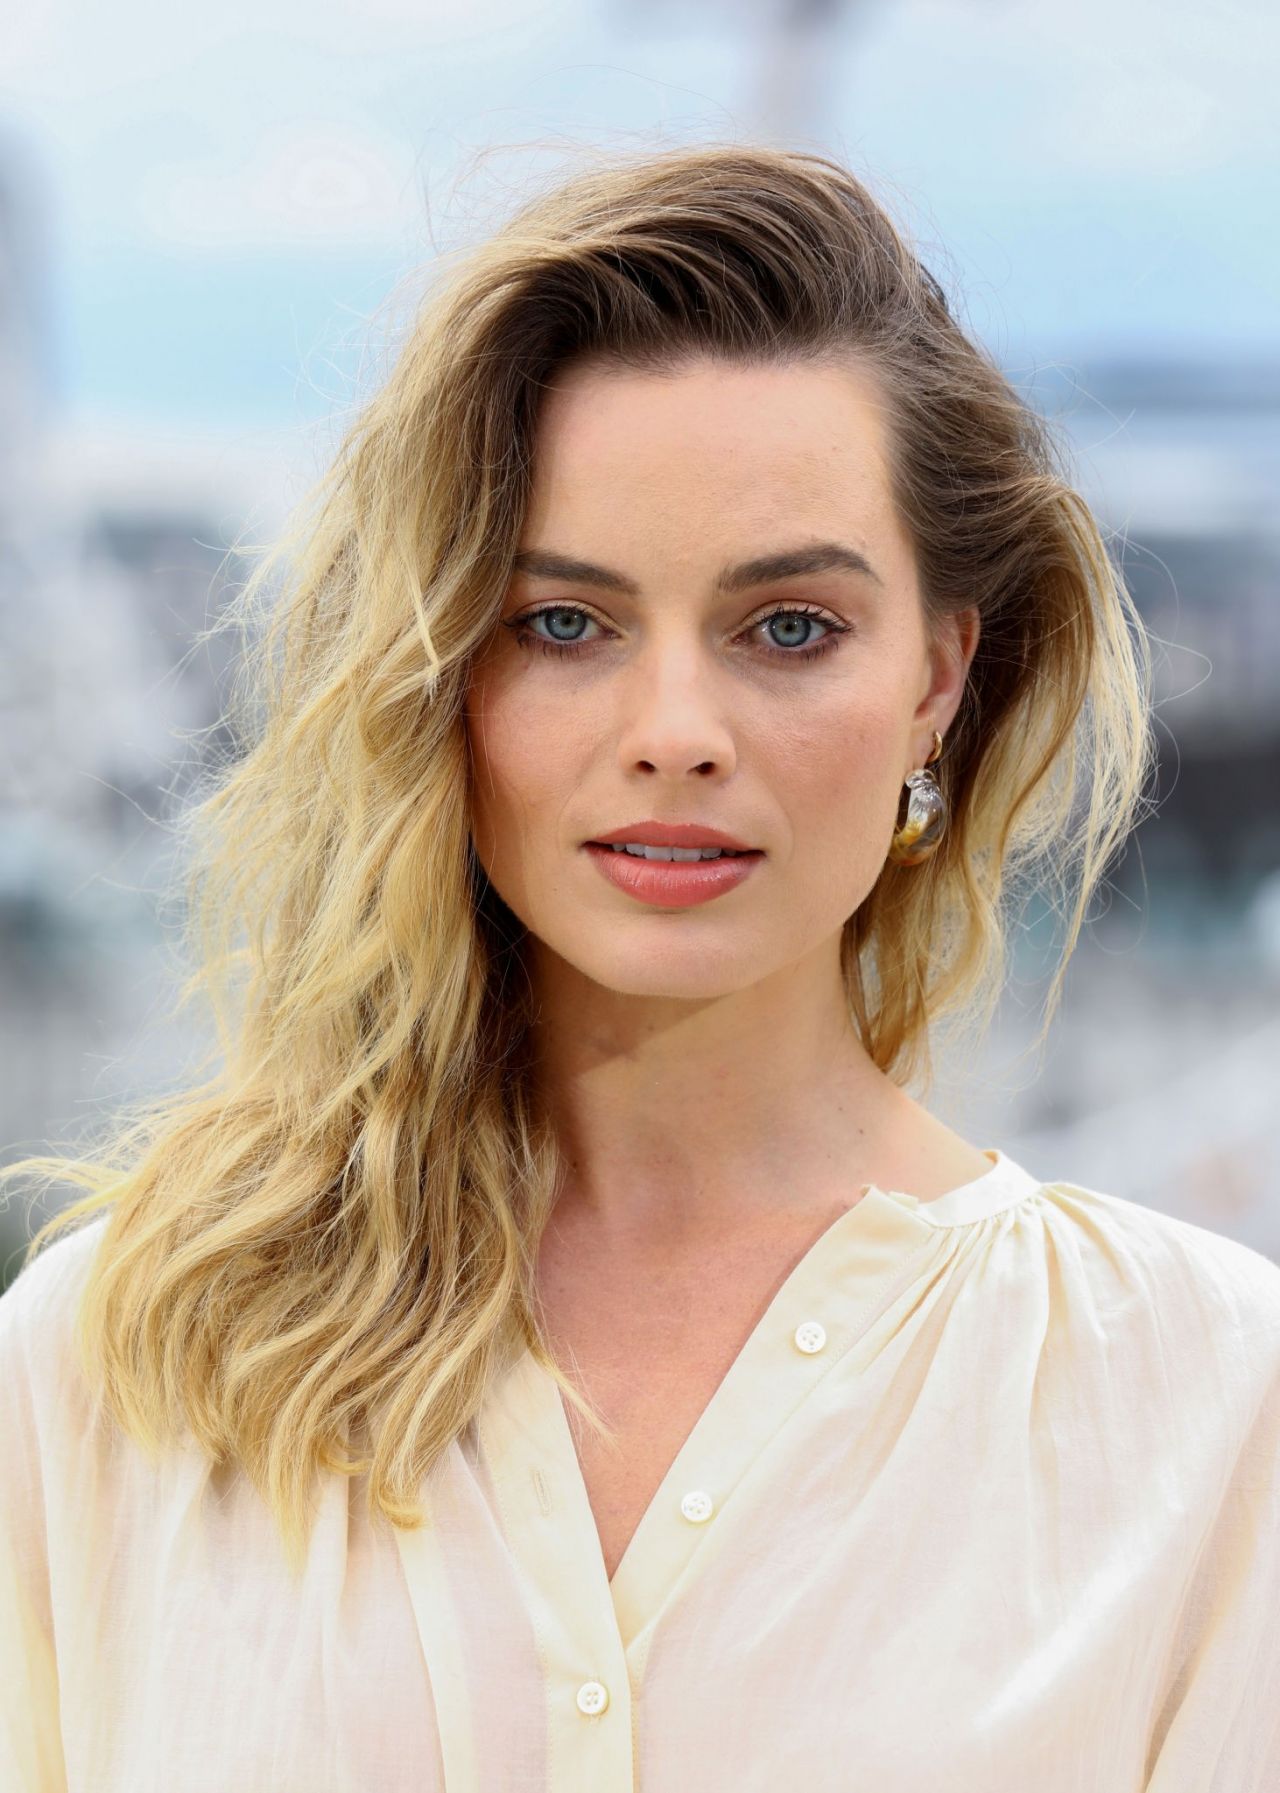 https://celebmafia.com/wp-content/uploads/2019/07/margot-robbie-once-upon-a-time-in-hollywood-photocall-in-london-16.jpg